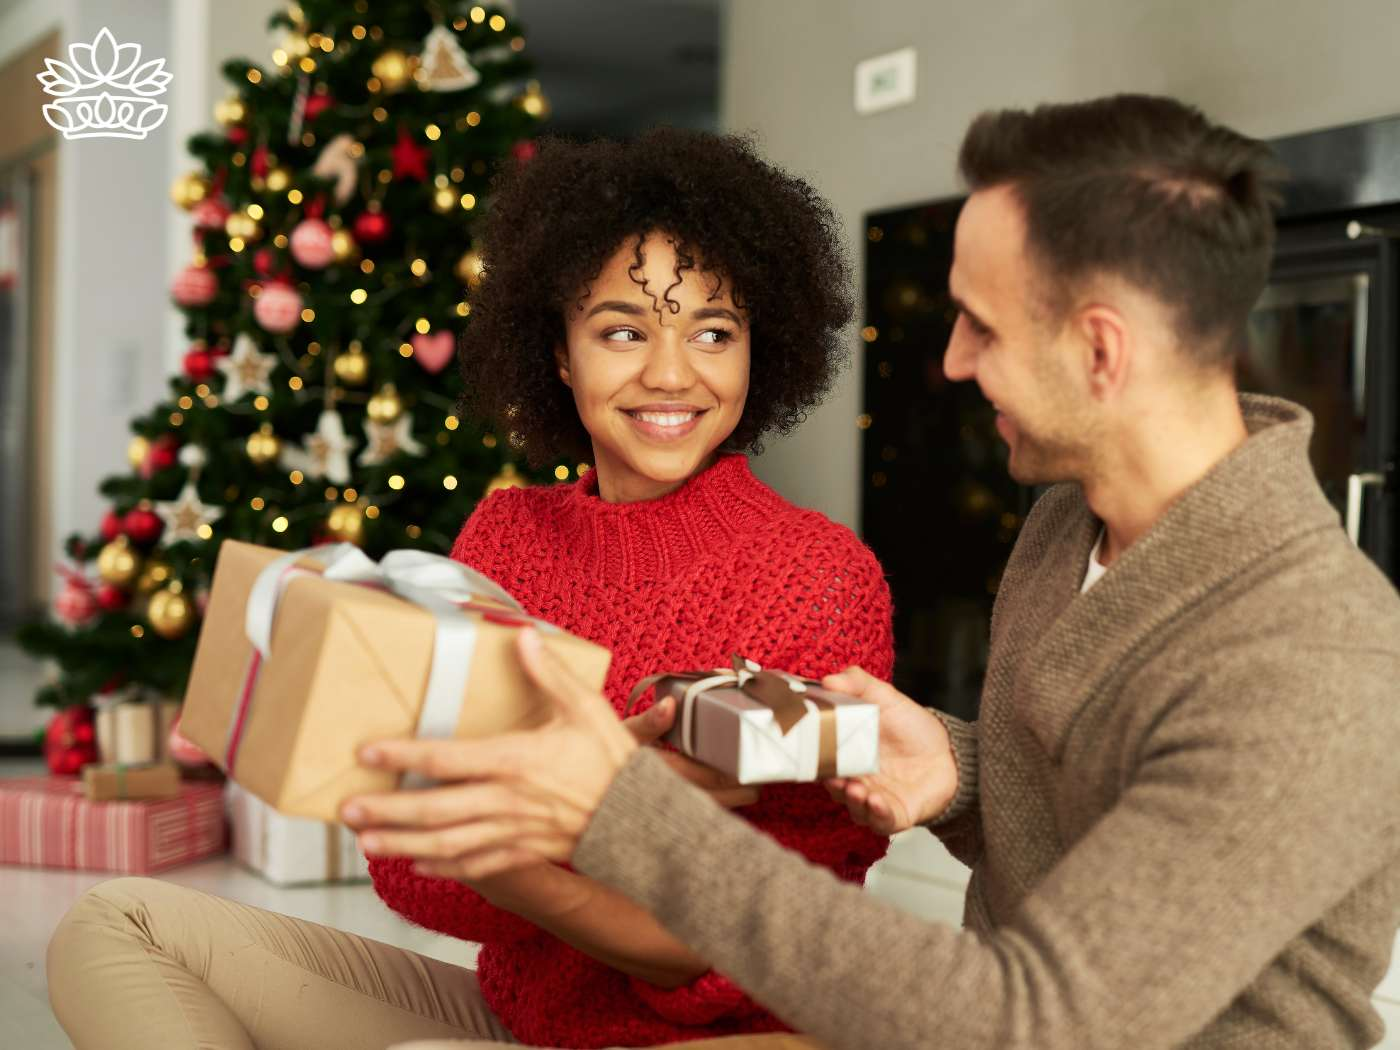 A man surprises a woman with a beautifully wrapped gift hamper, capturing a joyful moment of holiday gift delivery in a cozy setting with a Christmas tree in the background. Part of the Gift Boxes Collection from Fabulous Flowers and Gifts.